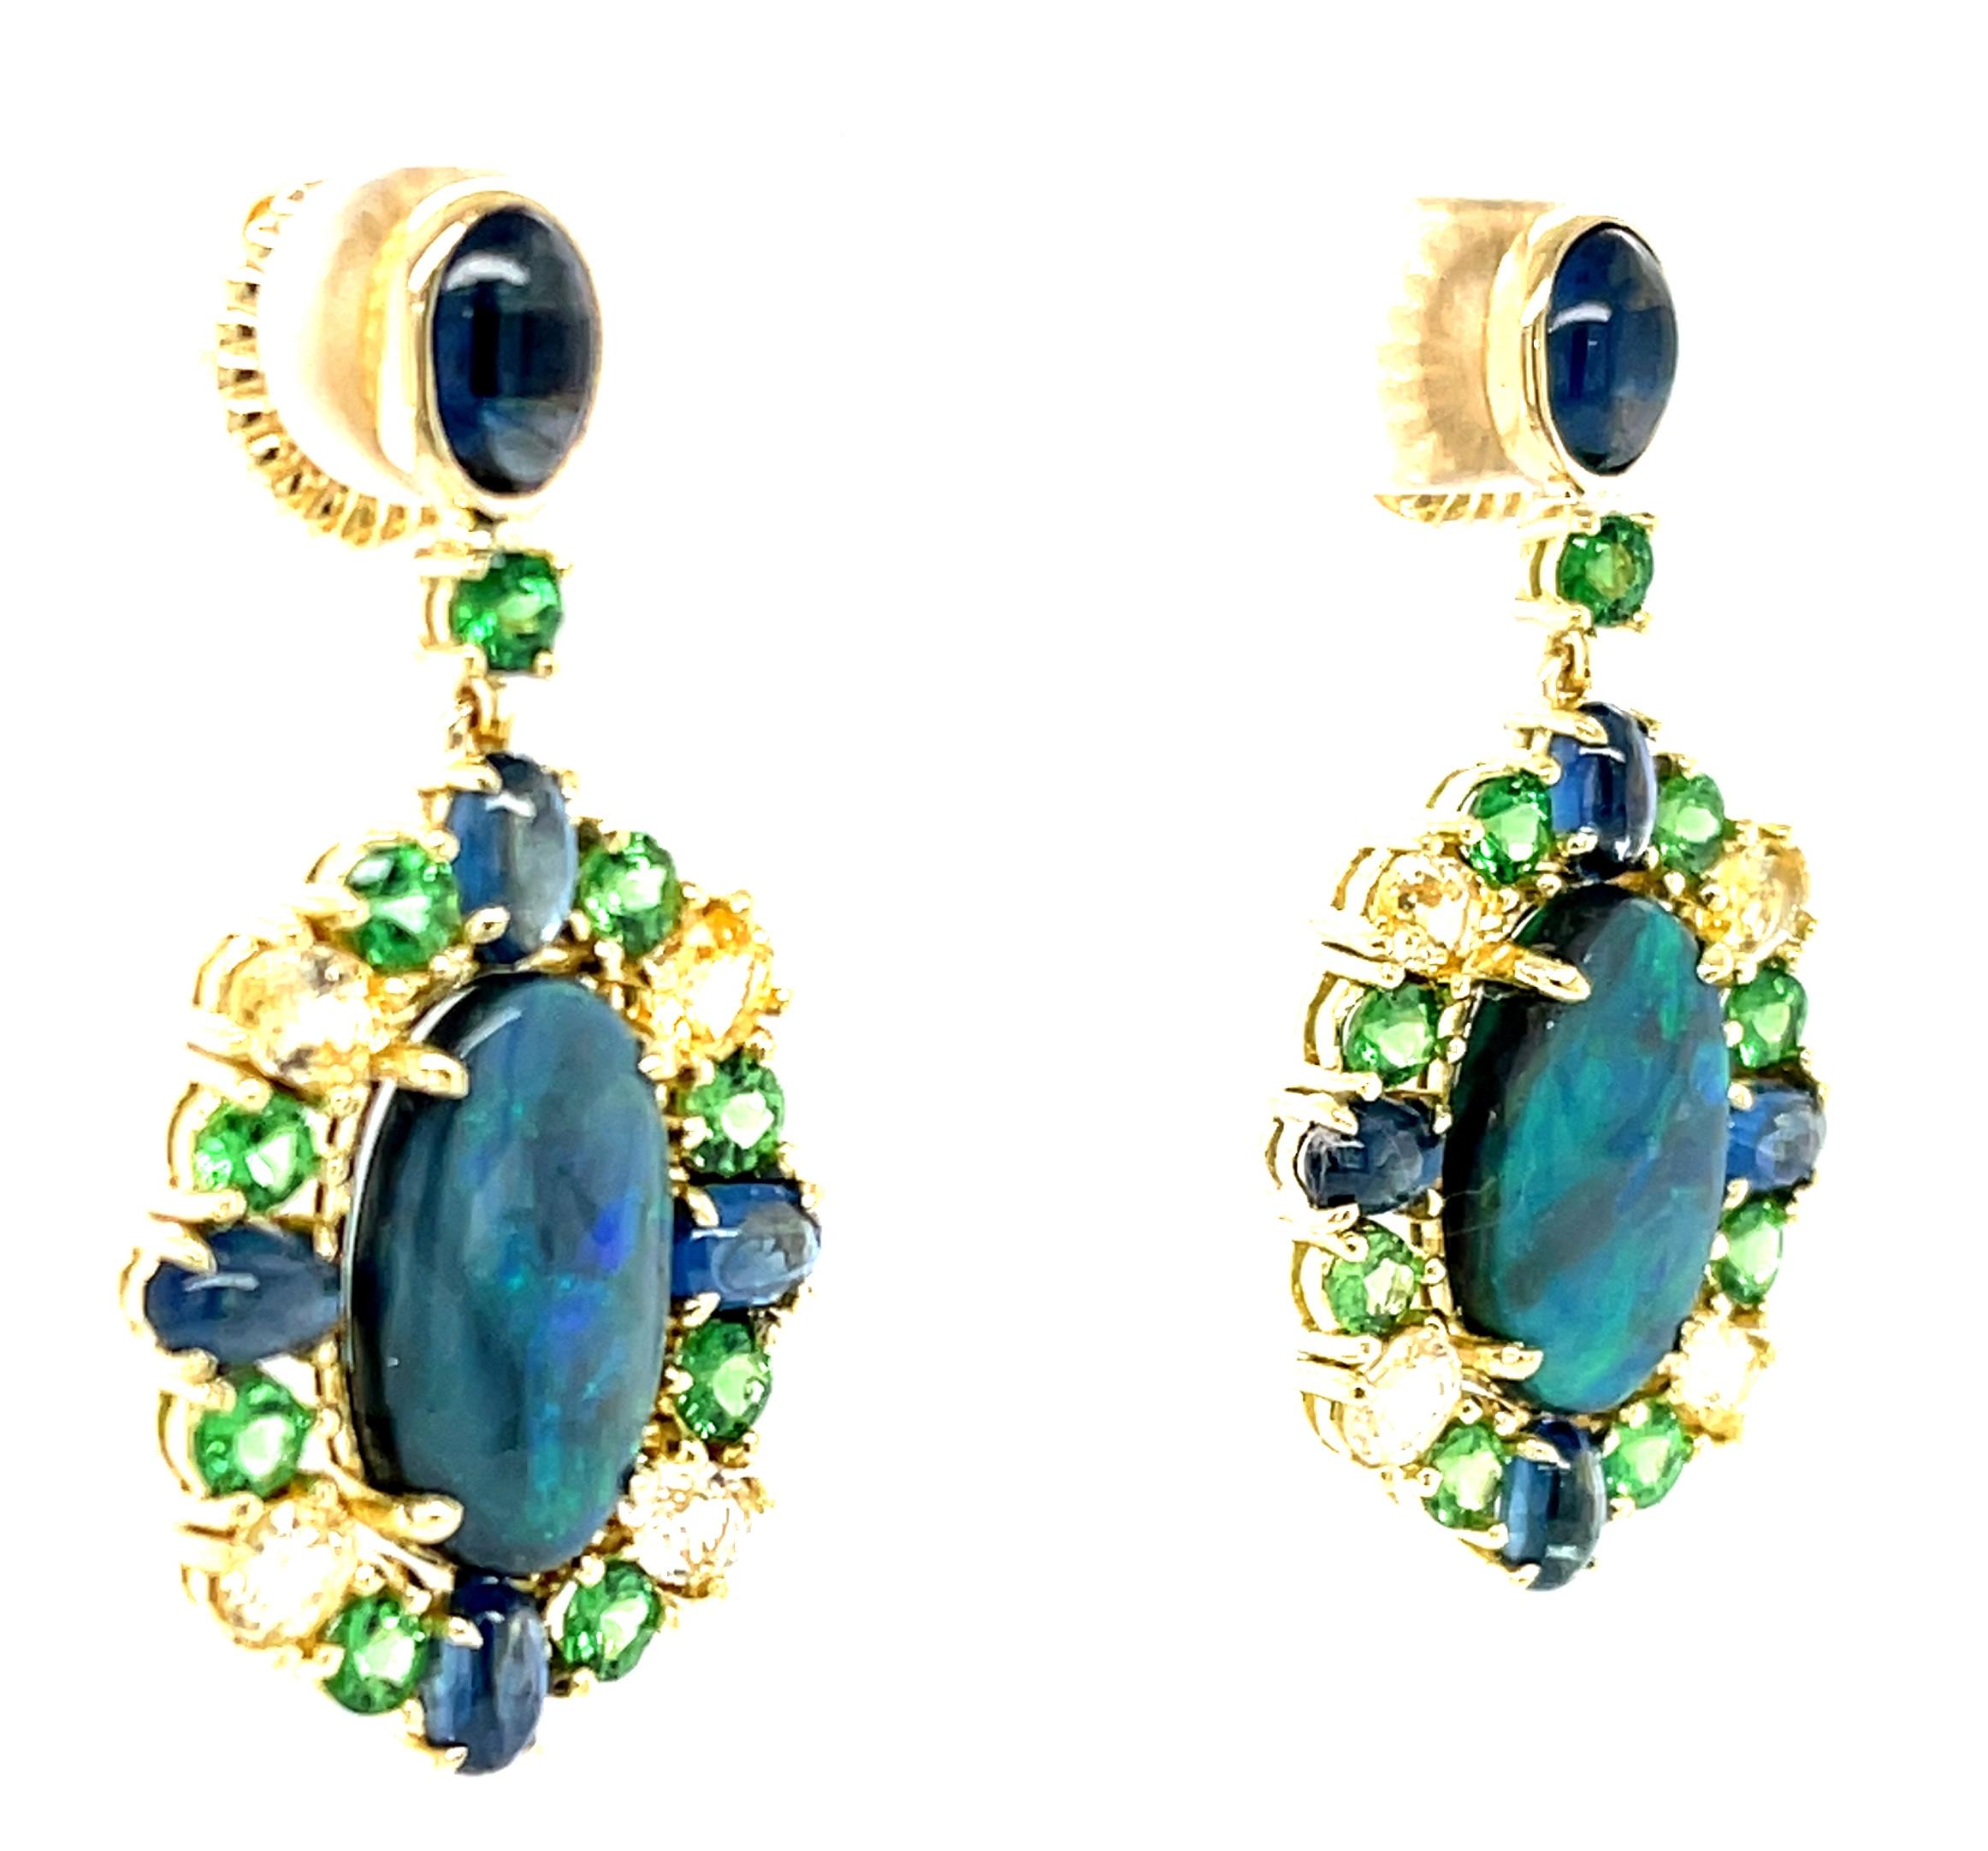 These dazzling gemstone earrings are true originals, featuring fine black opals framed with a spectacular gemstone palette of blues and greens! The black opals have an elegant, elongated shape and striking play-of-color with flashes of electric